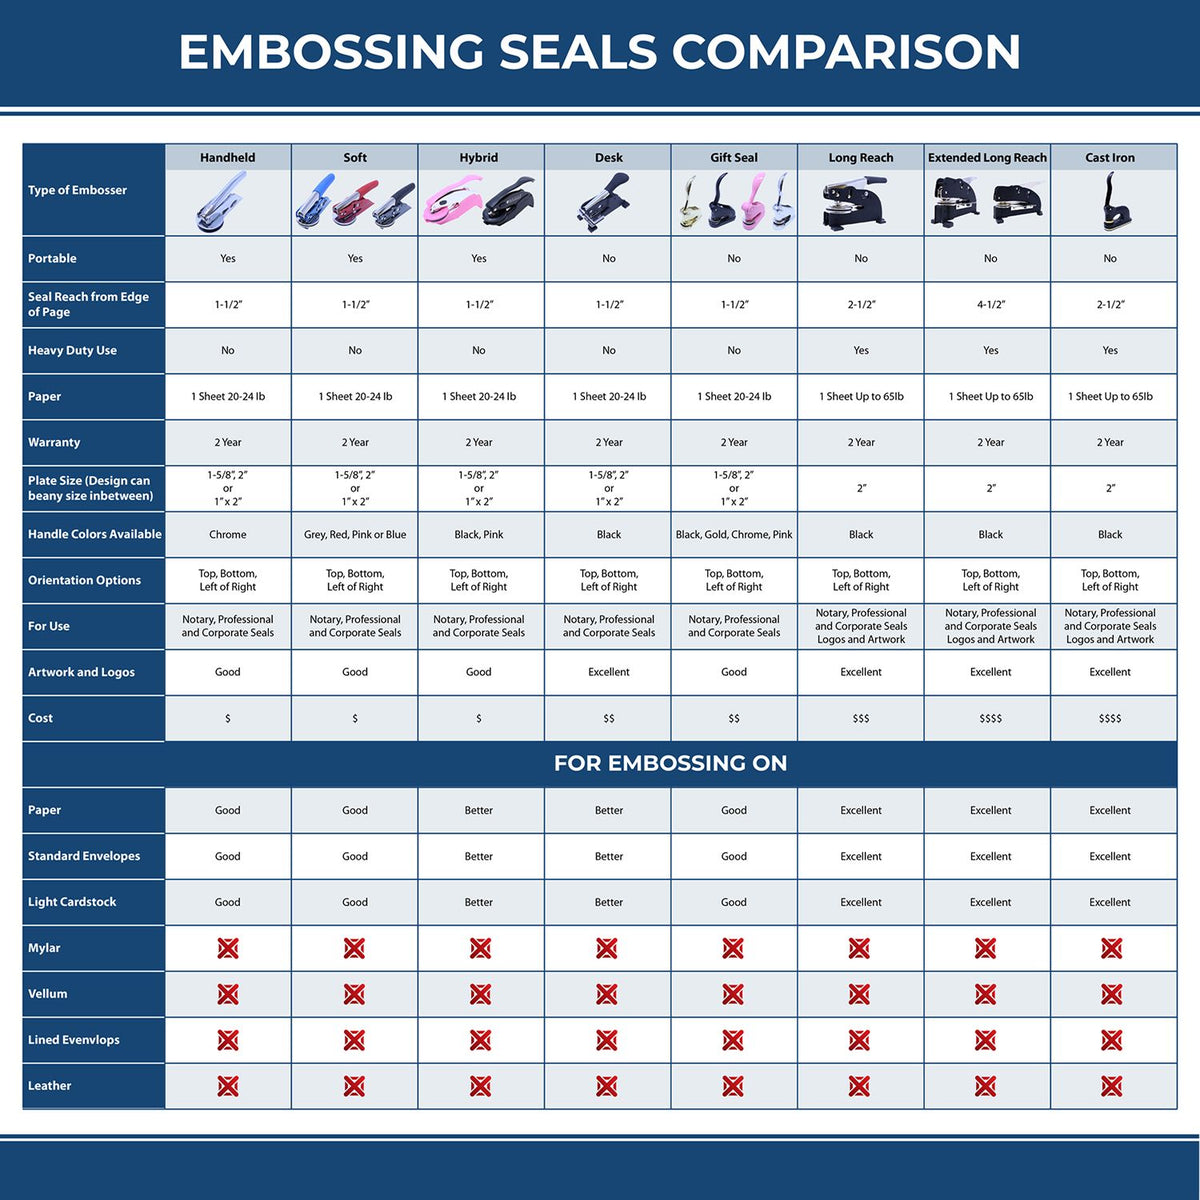 A comparison chart for the different types of mount models available for the Heavy Duty Cast Iron District of Columbia Geologist Seal Embosser